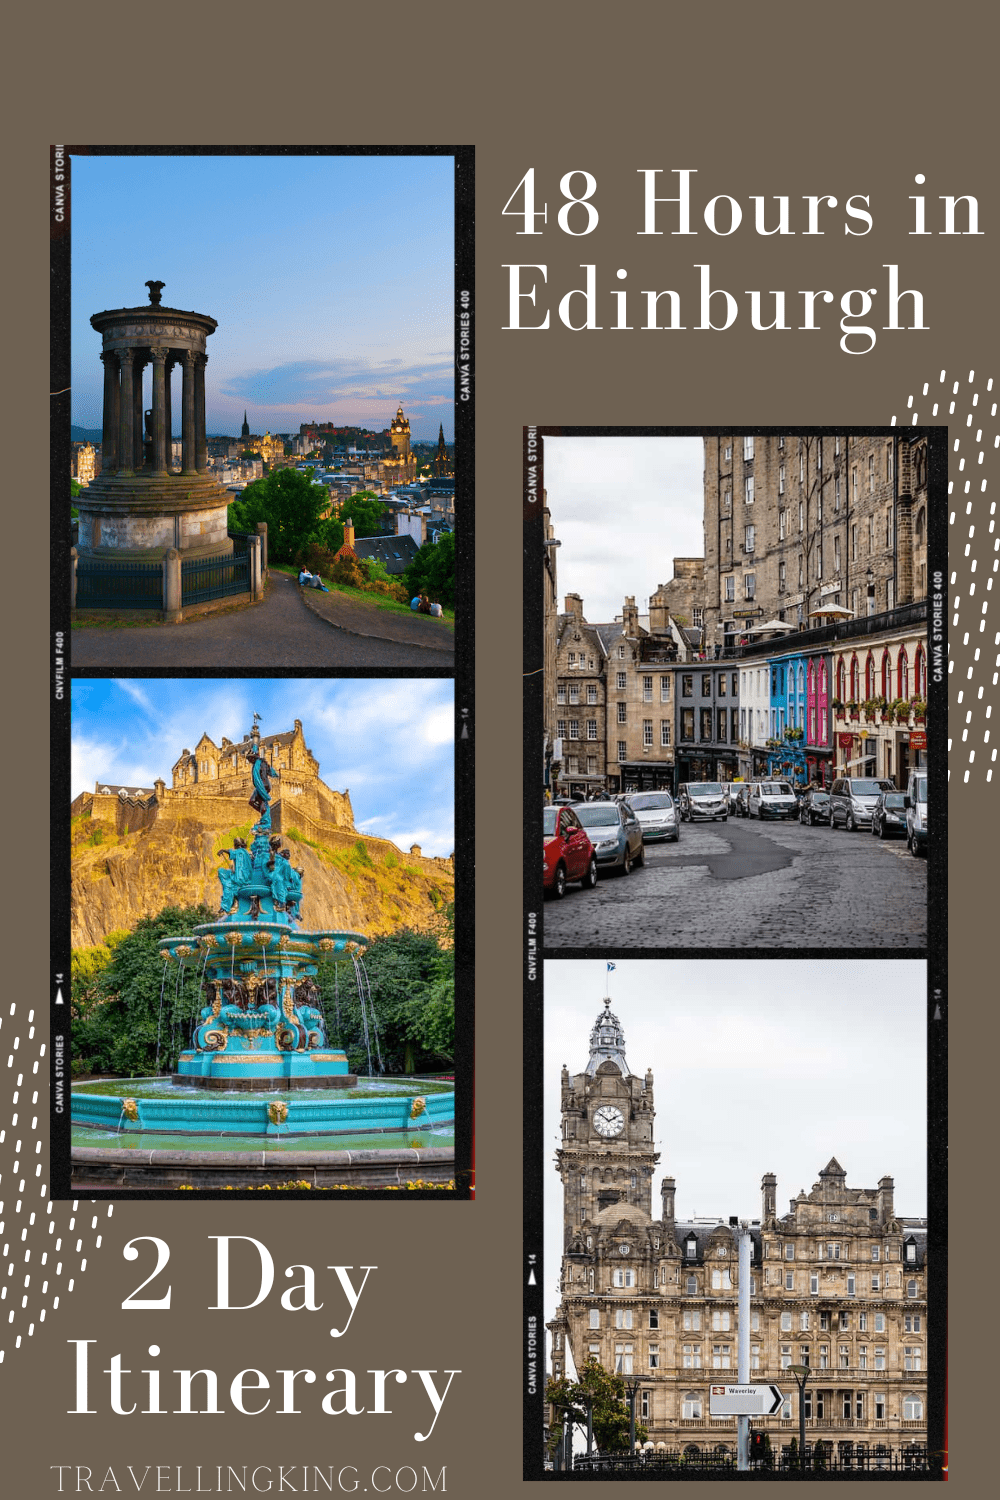 48 Hours in Edinburgh - A 2 Day Itinerary